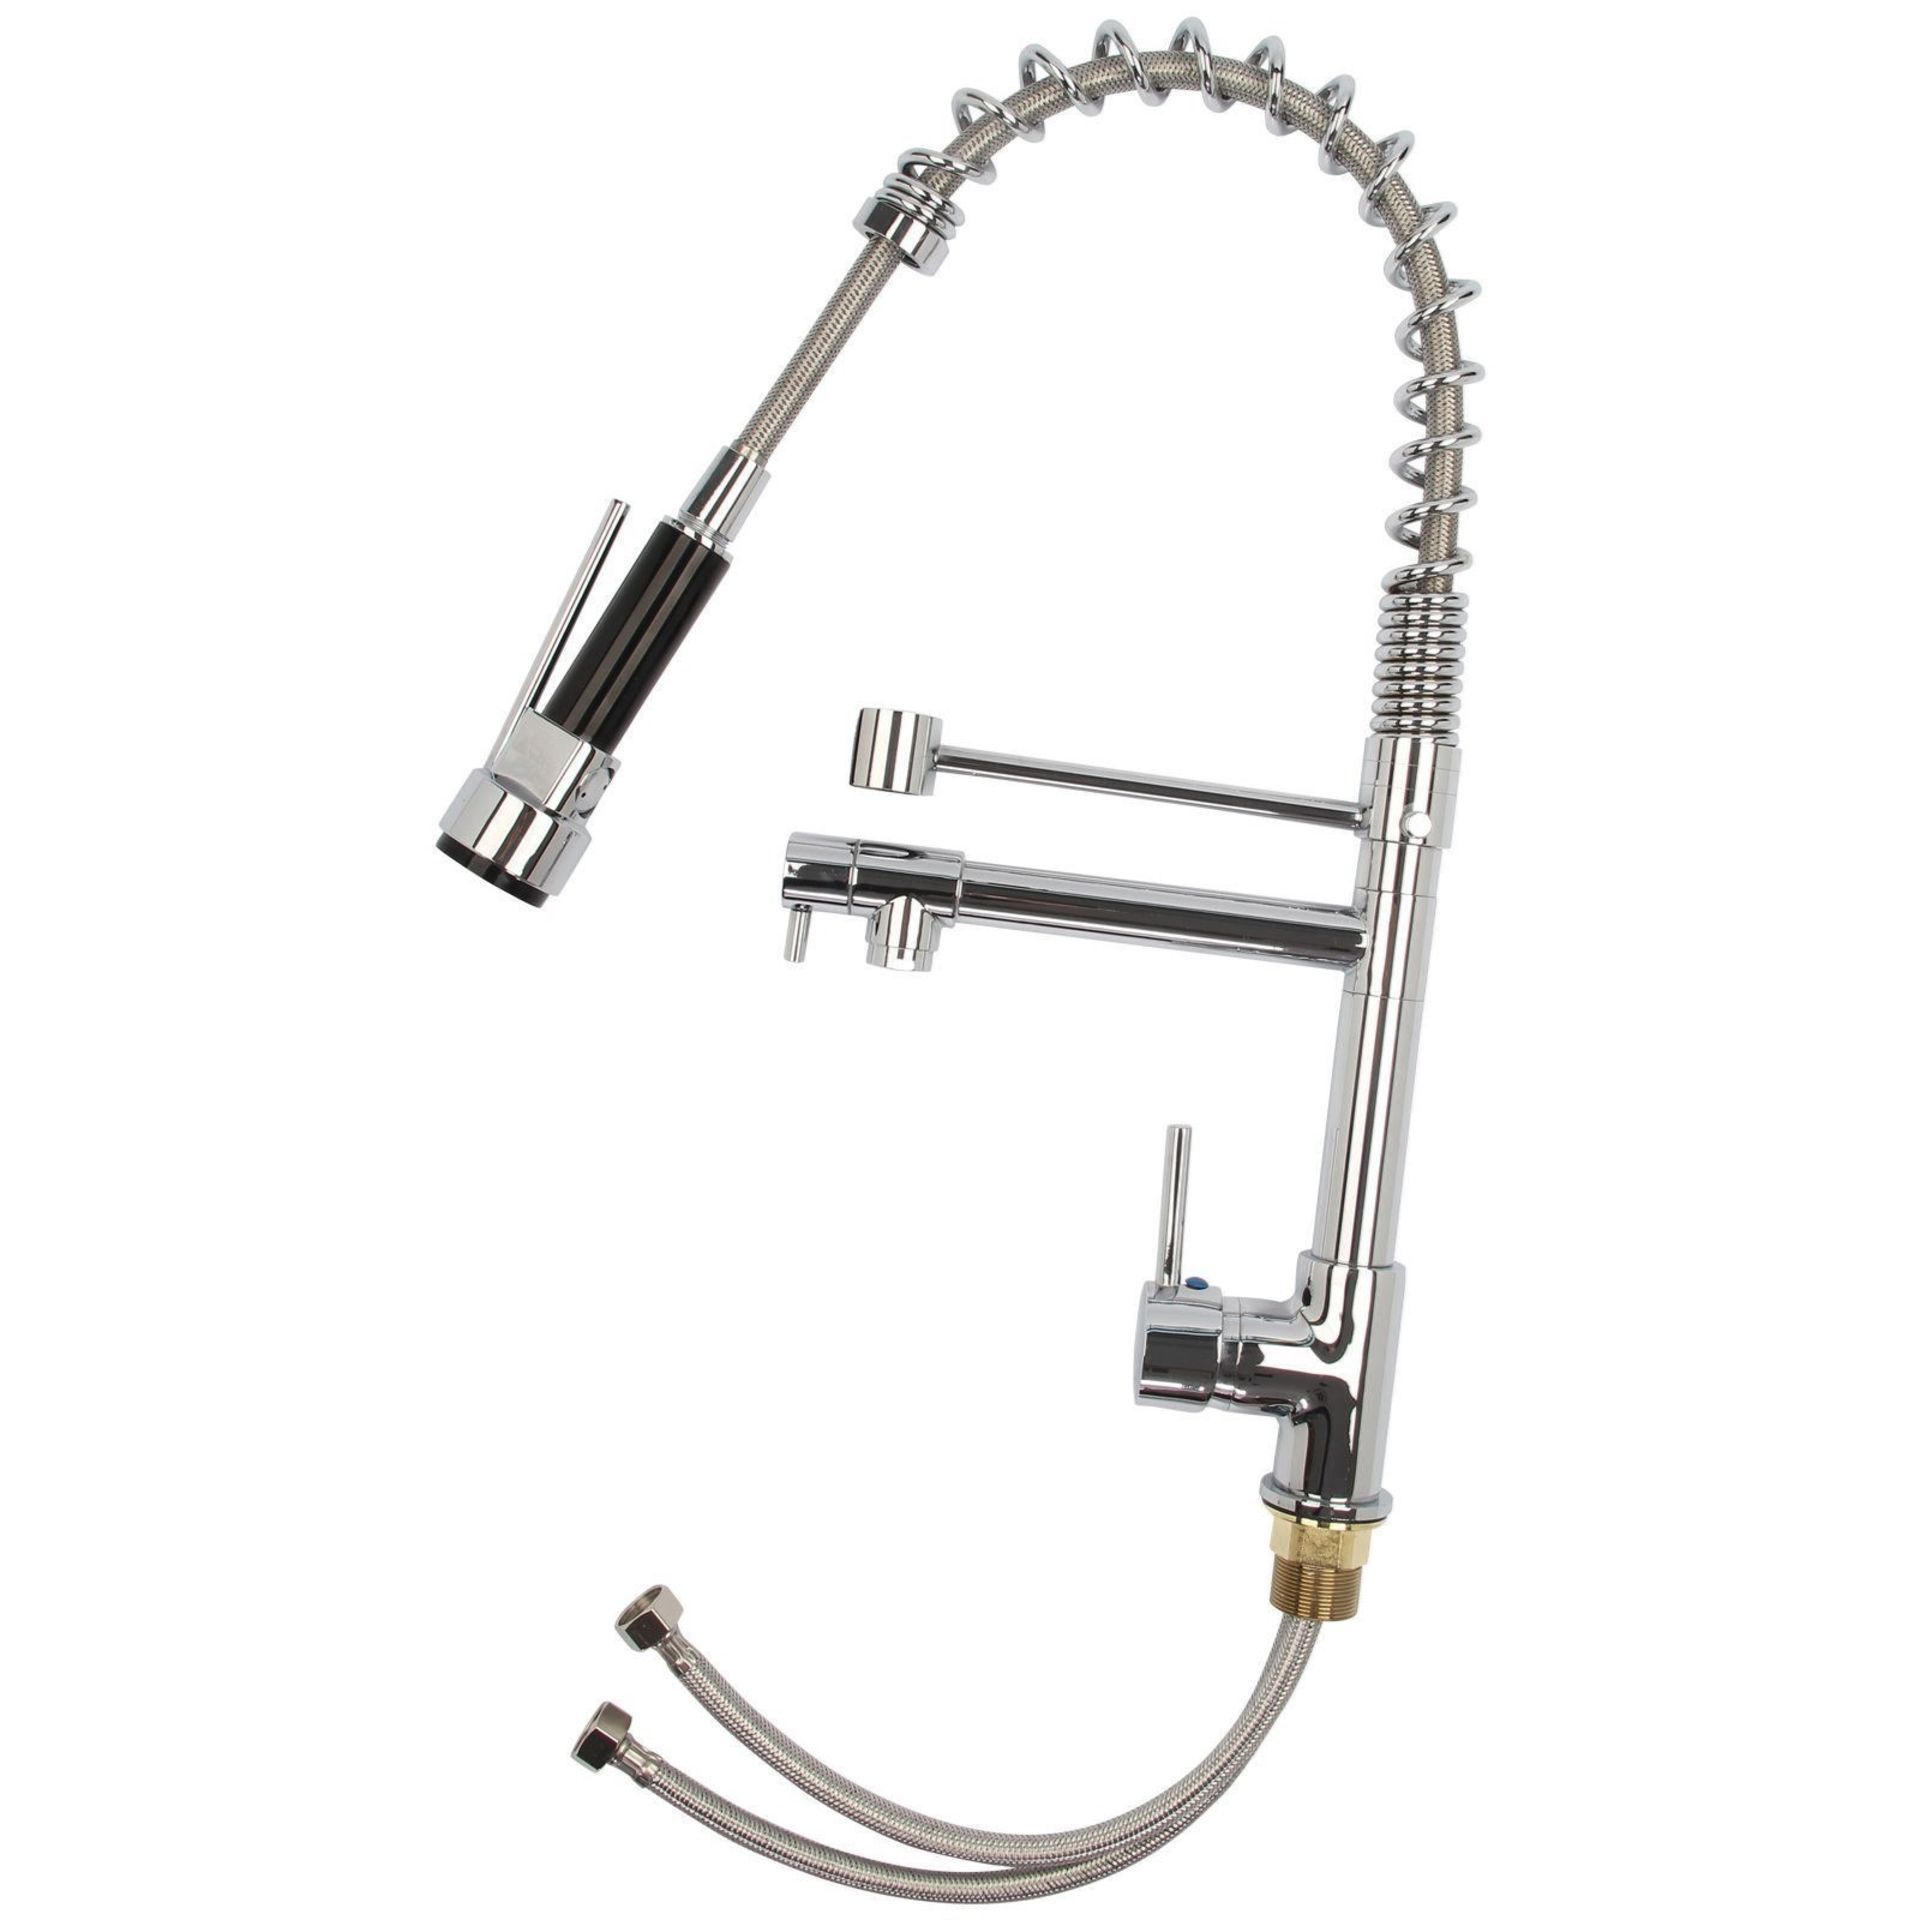 New & Boxed Bentley Modern Monobloc Chrome Brass Pull Out Spray Mixer Tap. RRP £349.99. This ... - Image 2 of 2